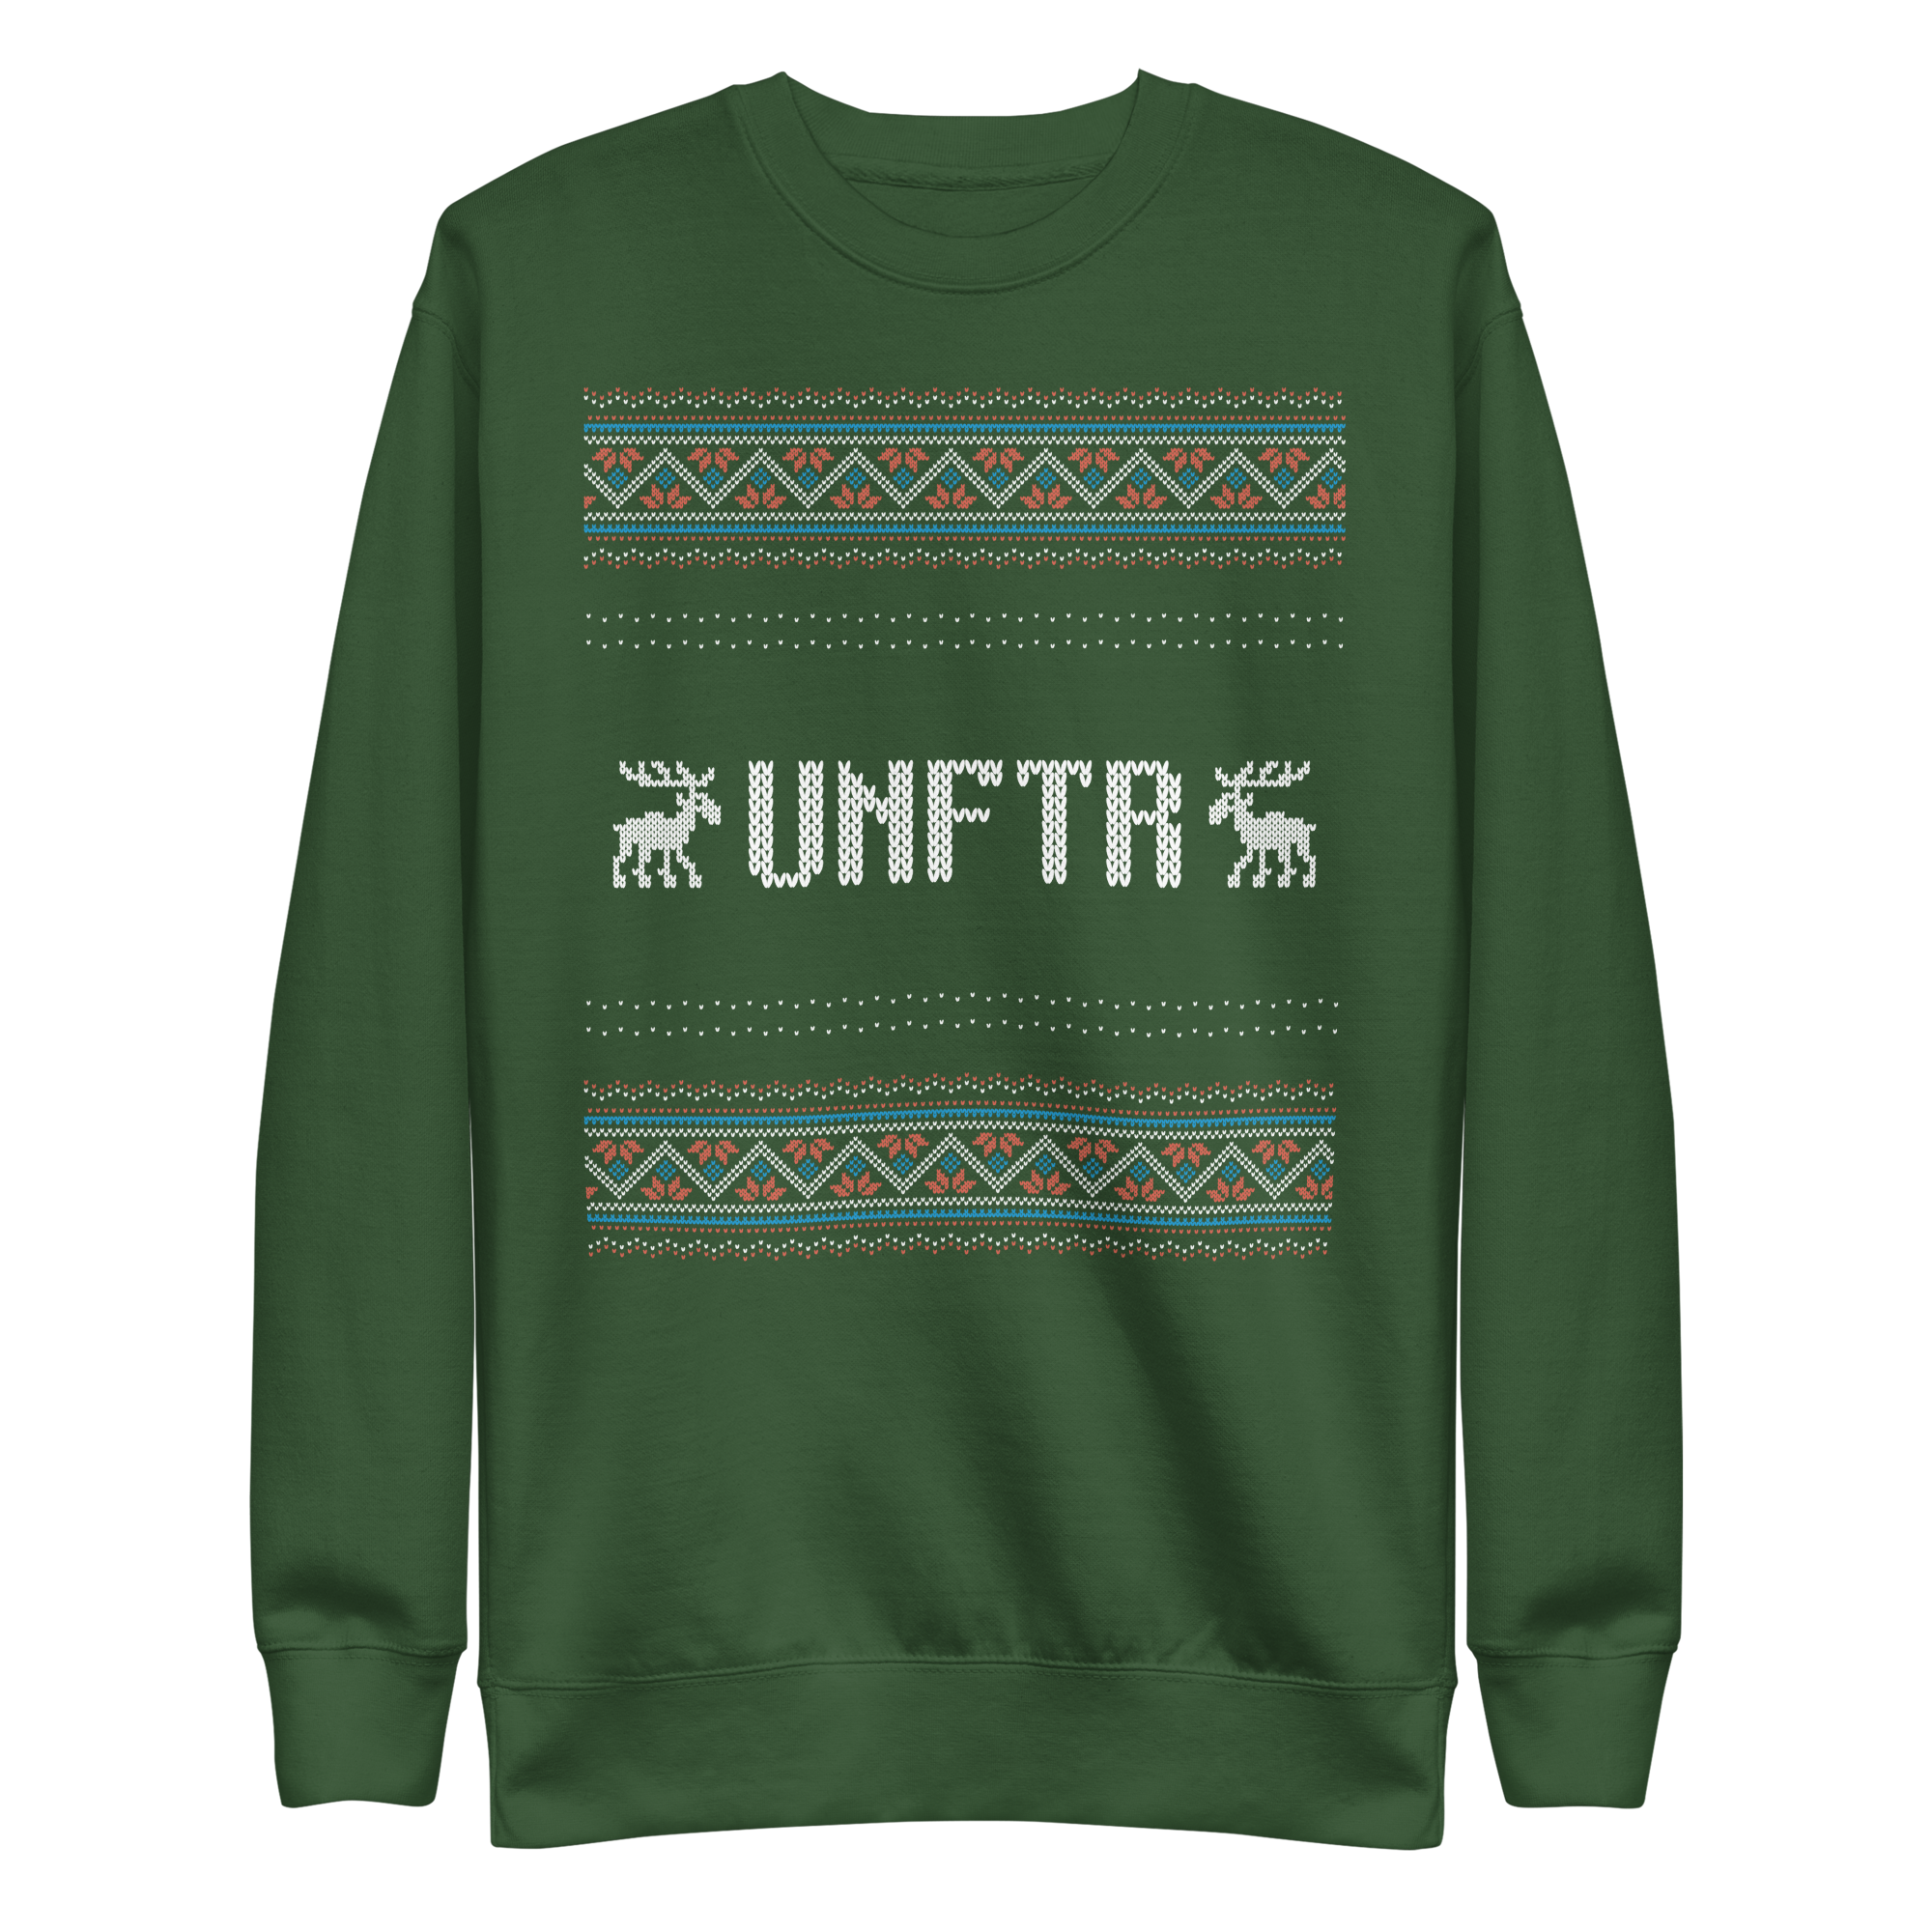 Green Ugly Sweater-style Crewneck that says UNFTR